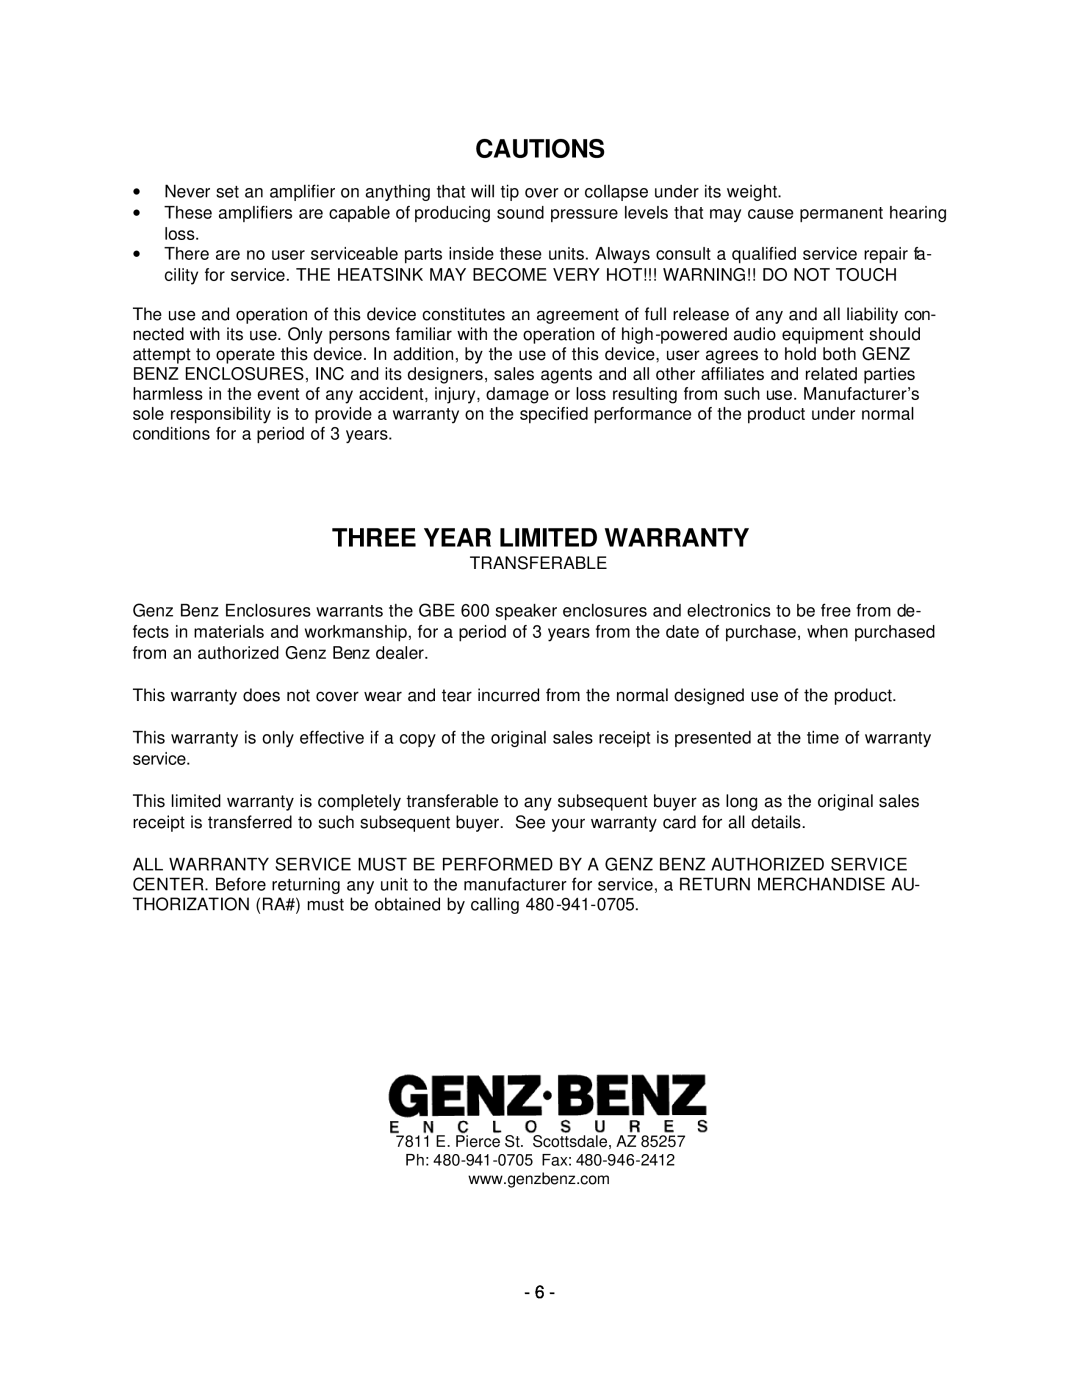 Genz-Benz GBE 600 technical manual Cautions, Three Year Limited Warranty 